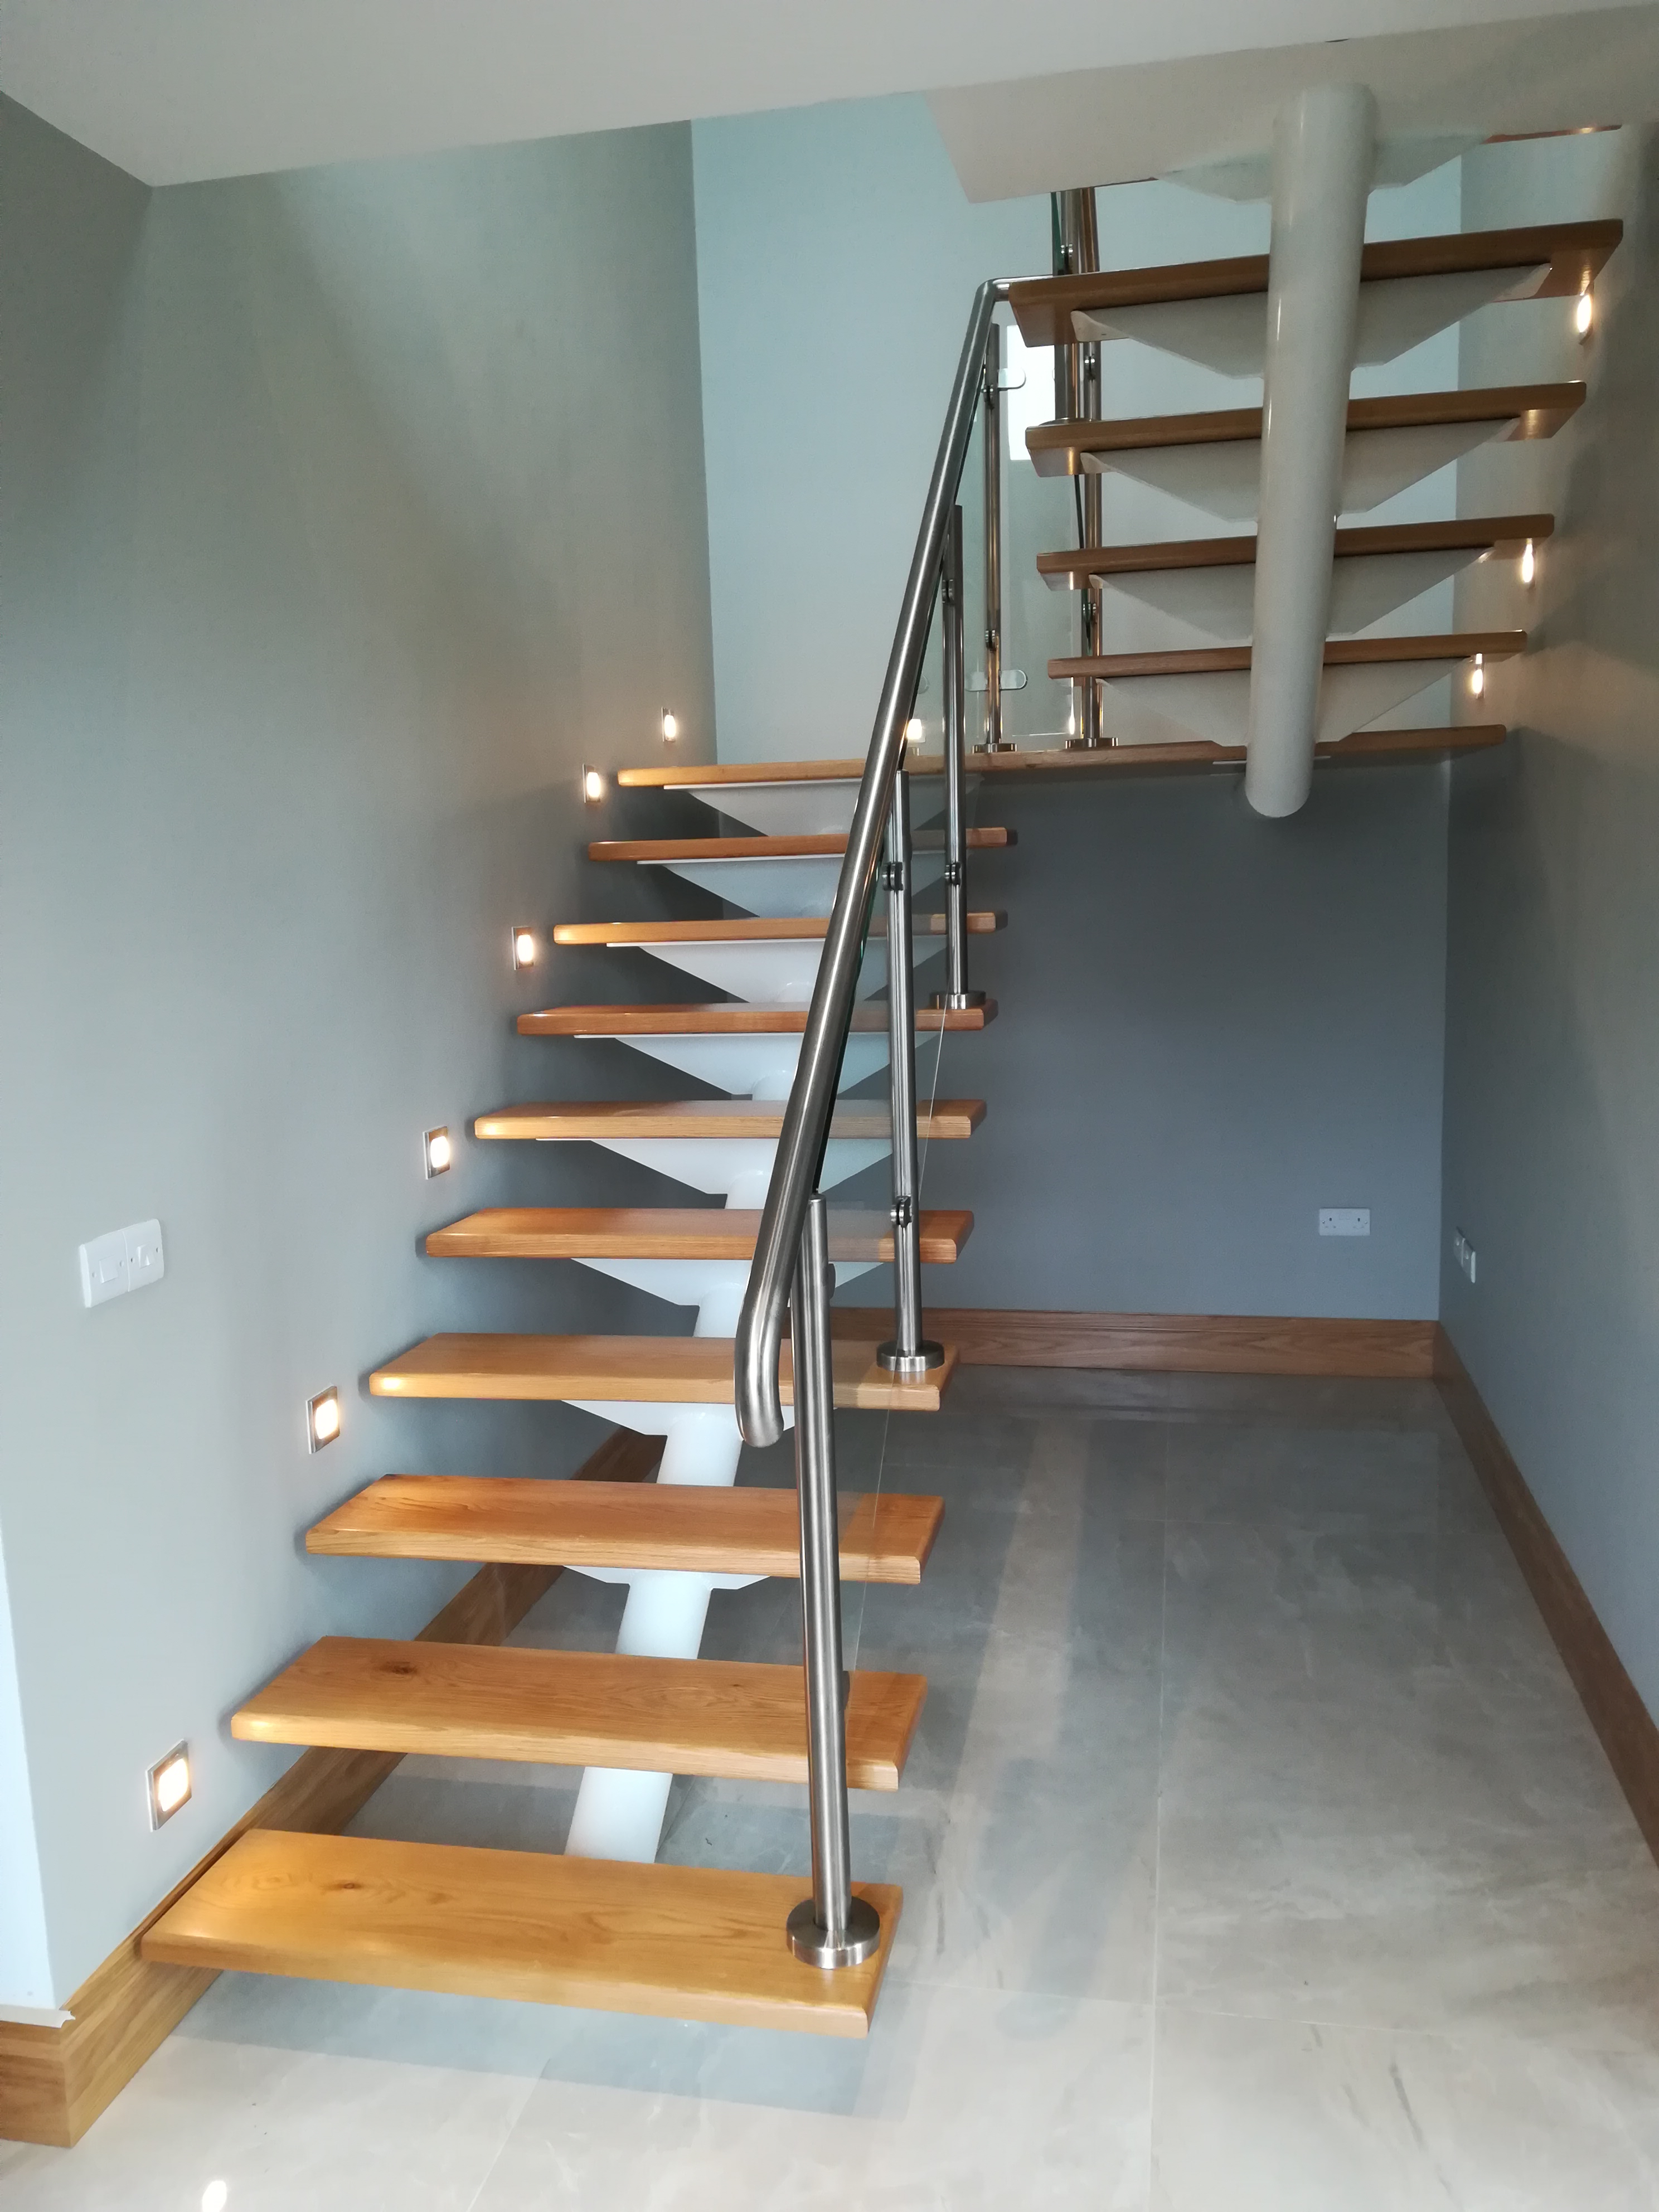 Stairs with Stainless Steel Handrail - E3D Steel Design Ltd.